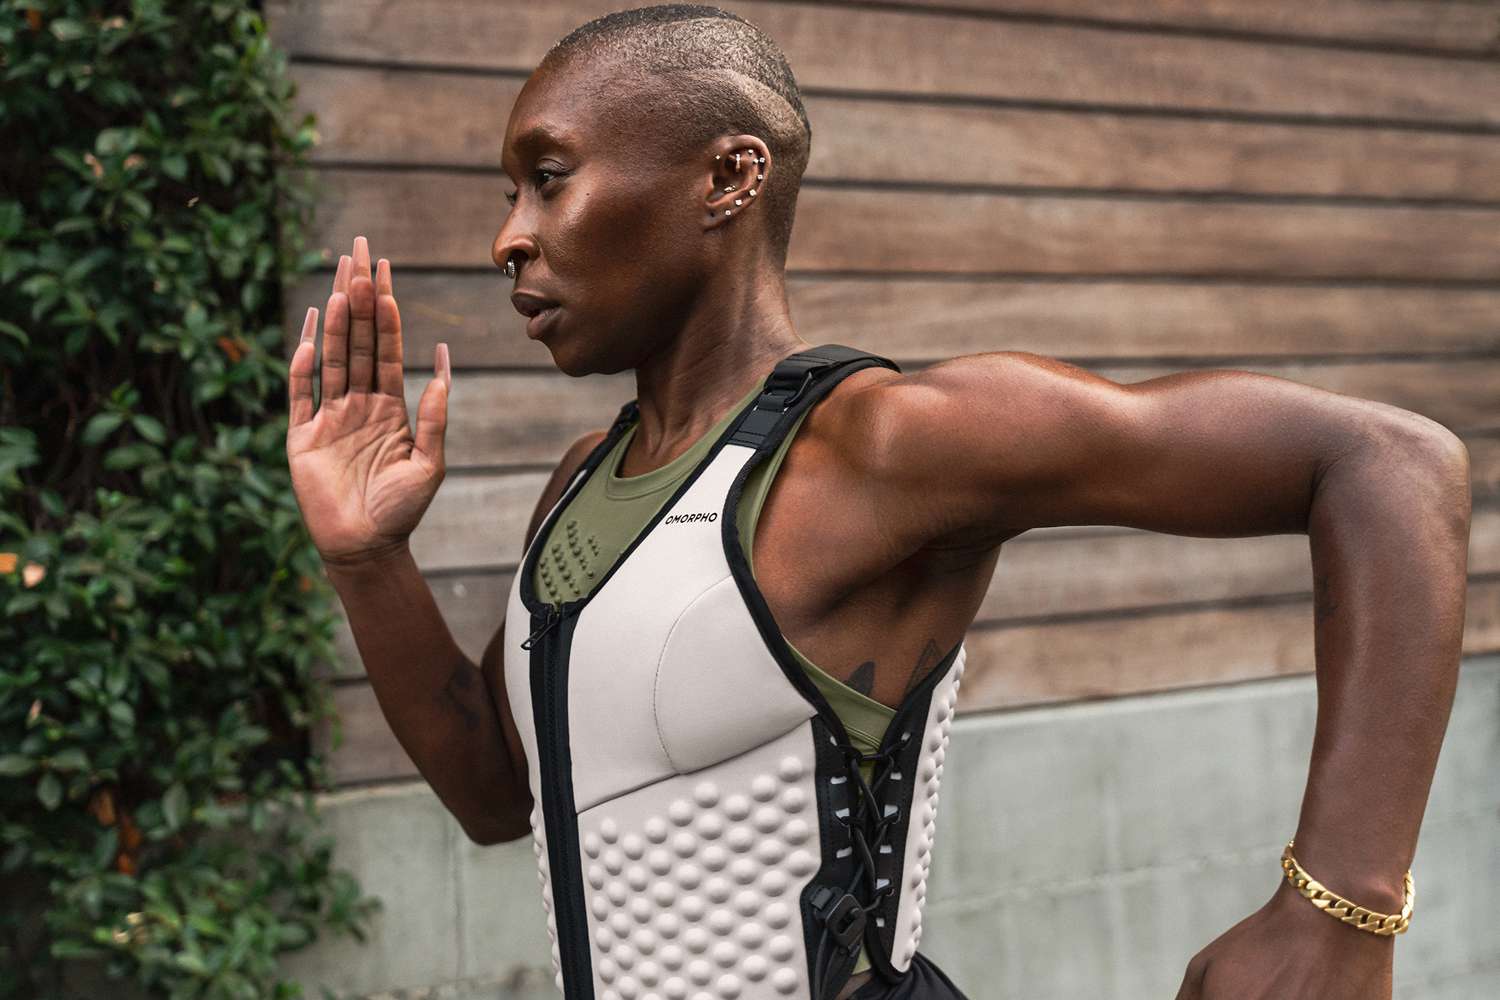 Cynthia Erivo launched fitness company, shares her journey